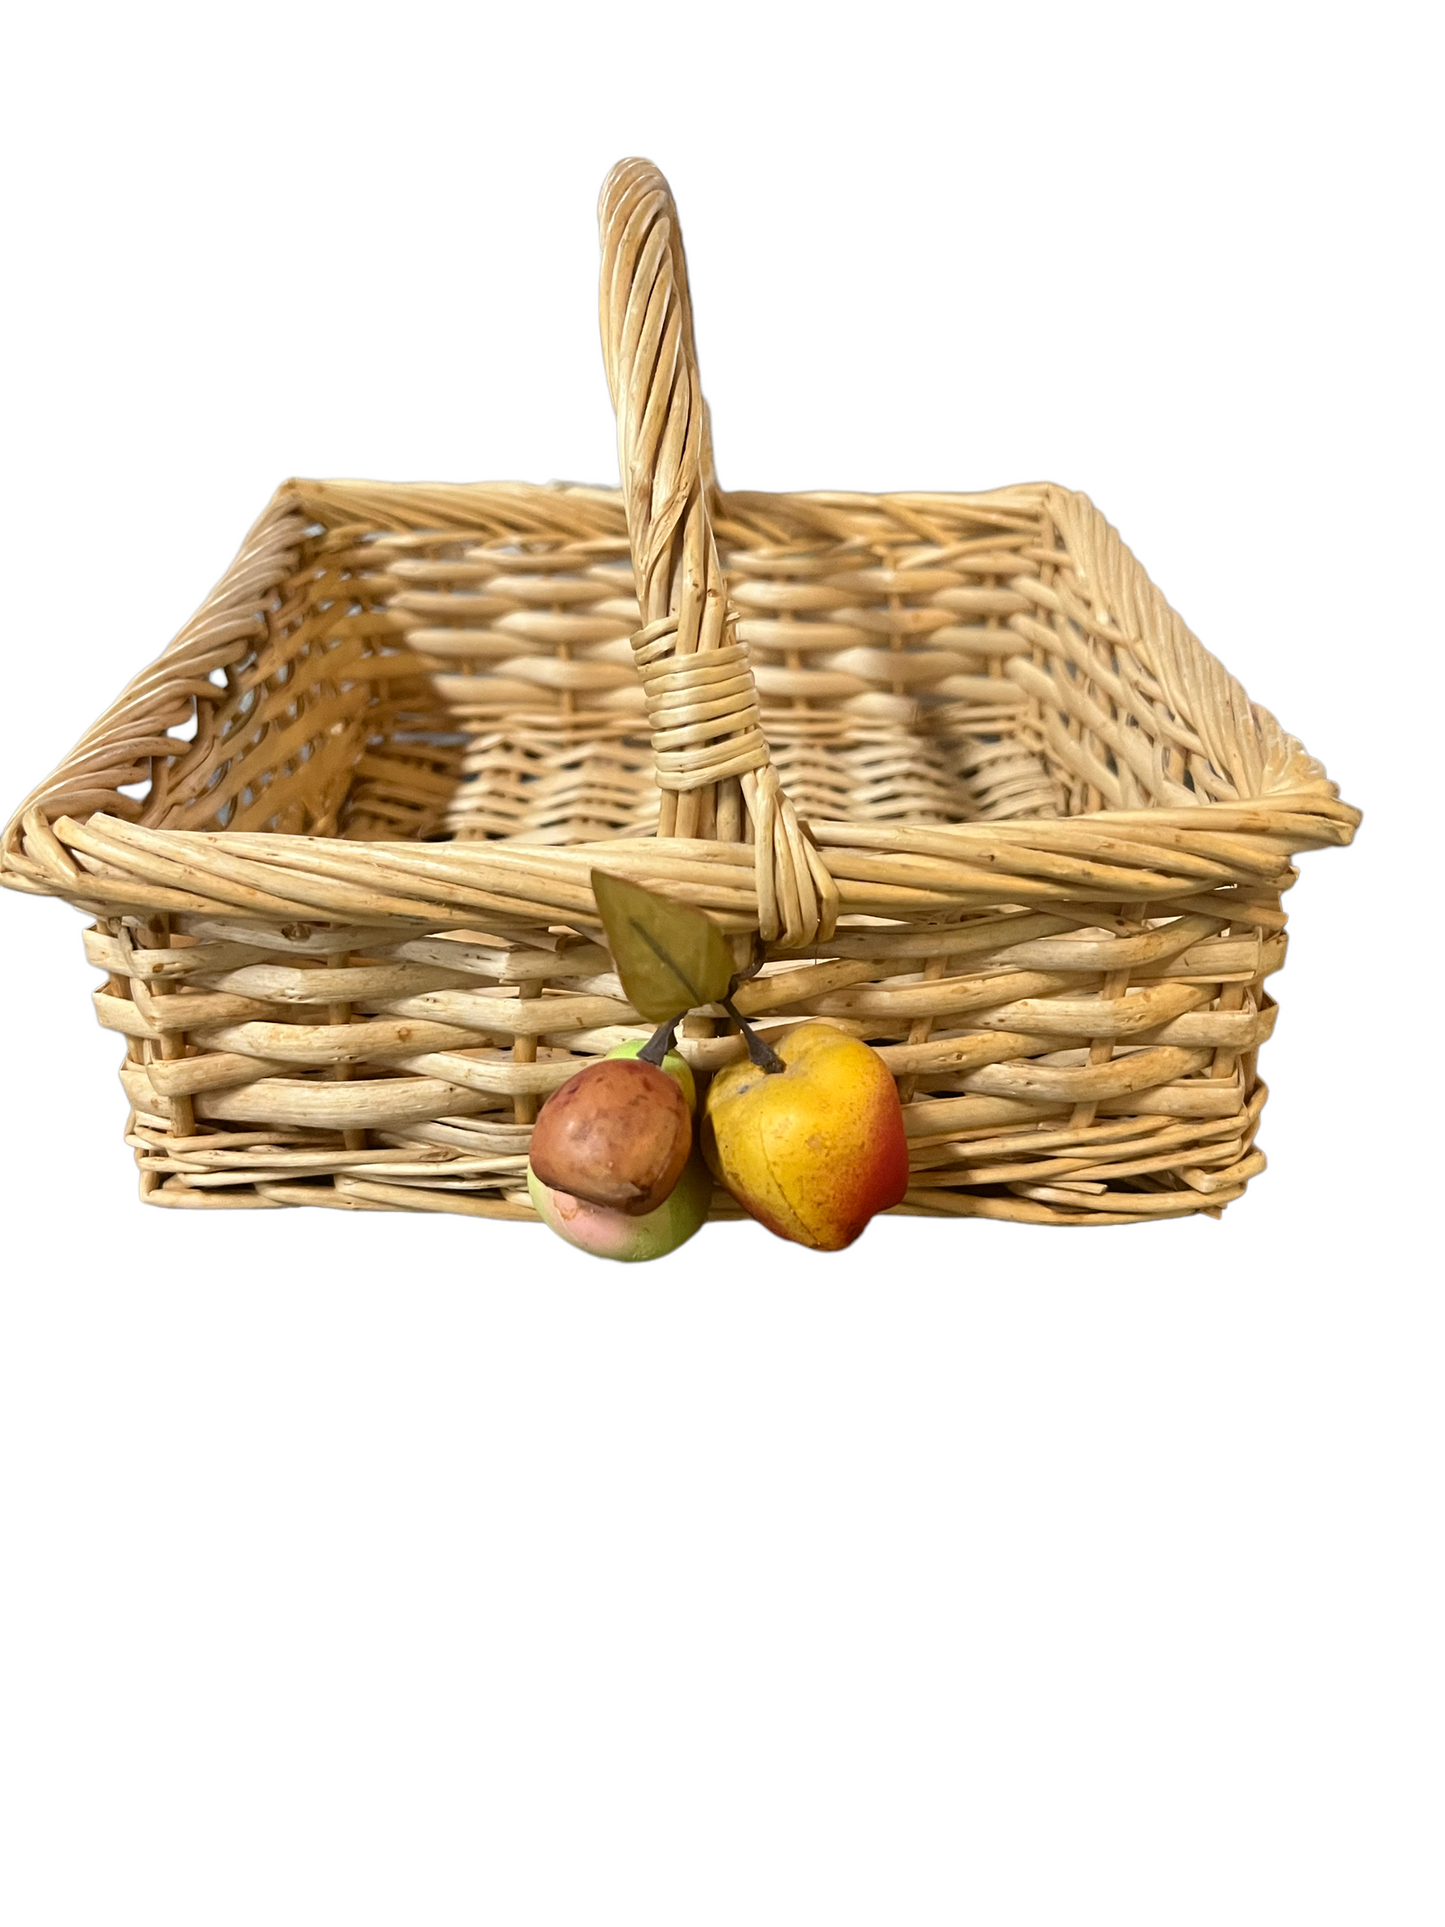 Woven Wicker Basket with fruit decor